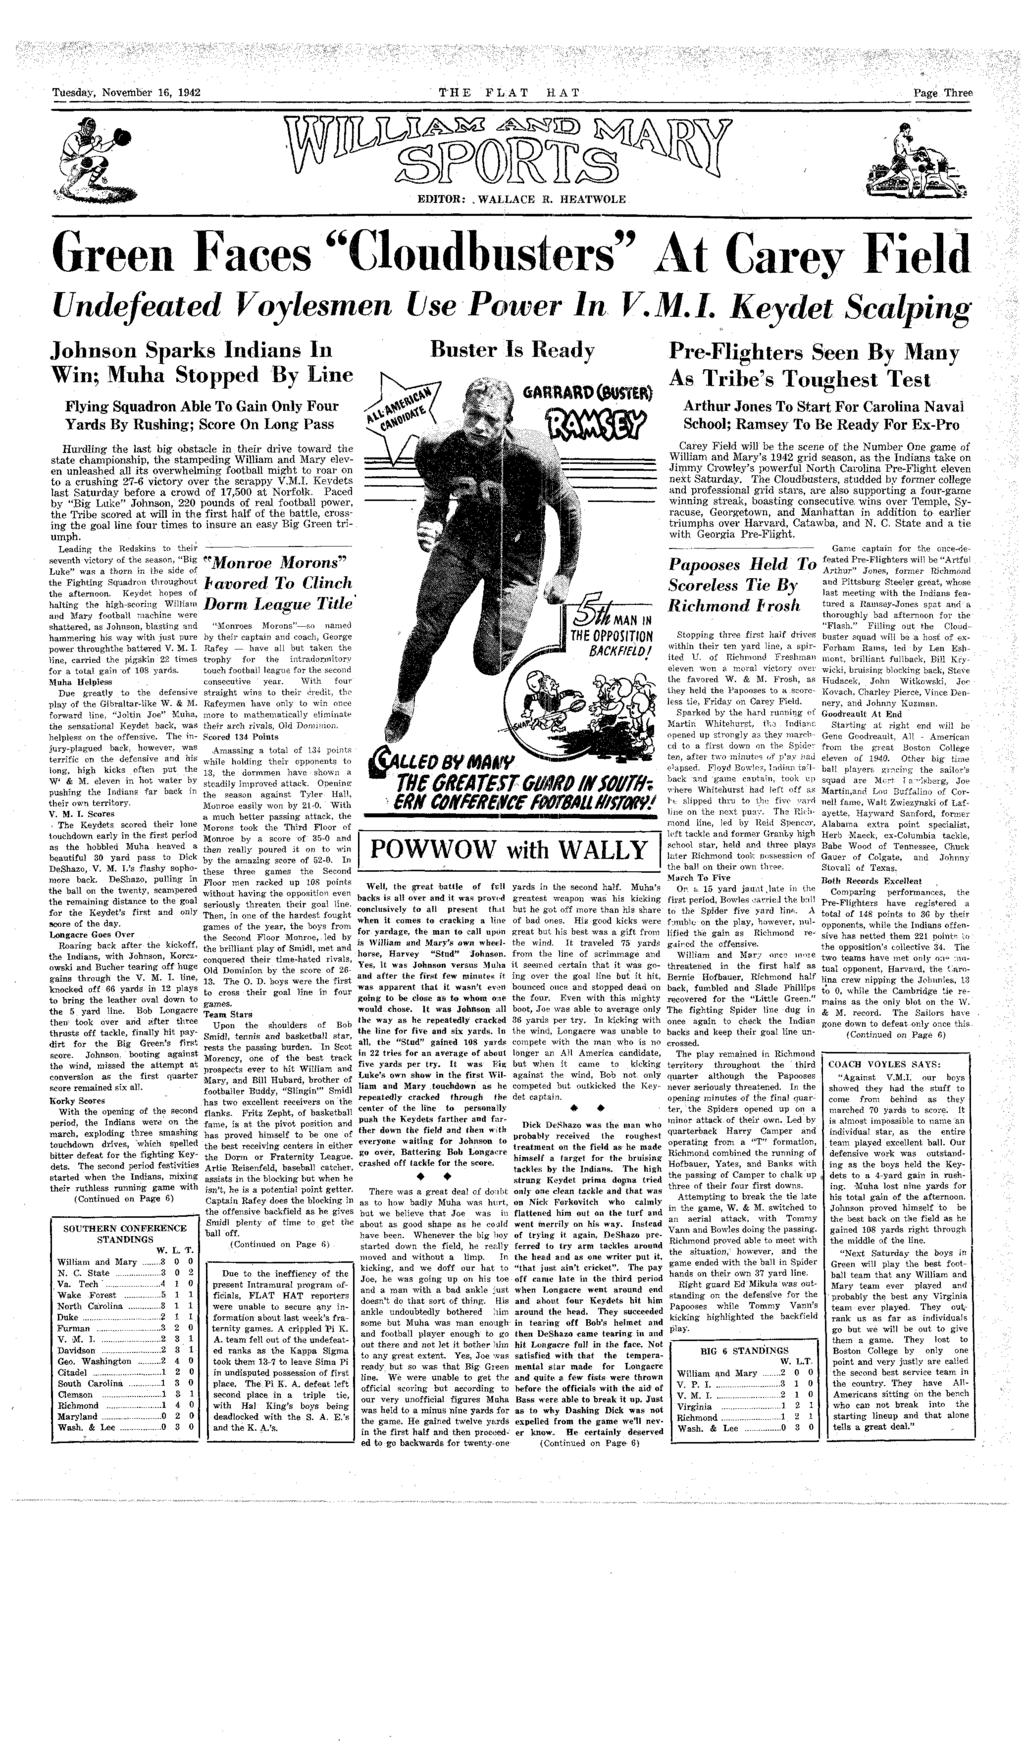 Tuesday November 16 1942 TEE FLAT RAT Page Three EDITOR: WALLACE R HEATWOLE Green Faces "Gloudbusers'' >arey n Undefeaed Voylesmen llse-power In VML Keyde Scalping Johnson Sparks Indians In Win; Muha